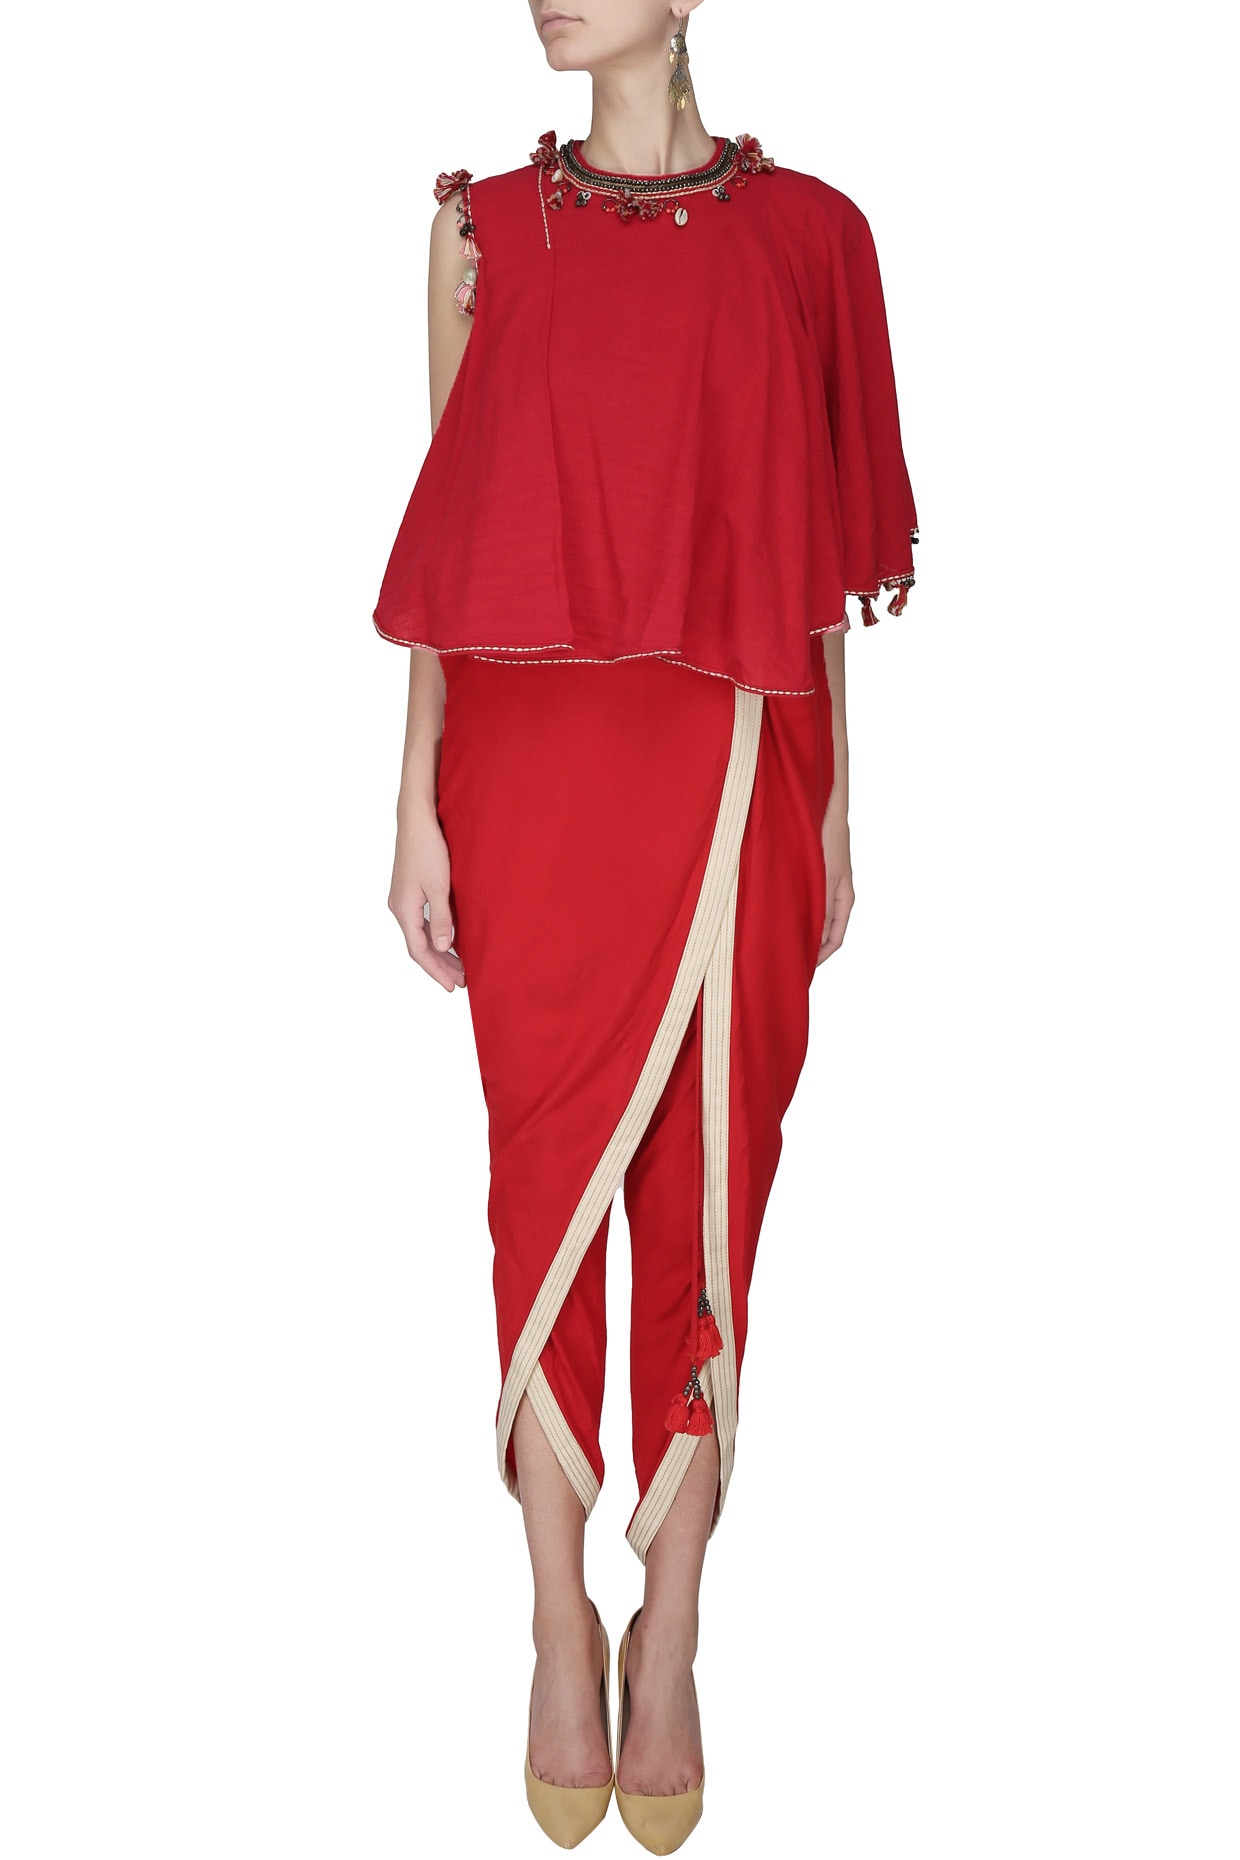 Solid Color Dupion Silk Dhoti Pant in Maroon : MXX237